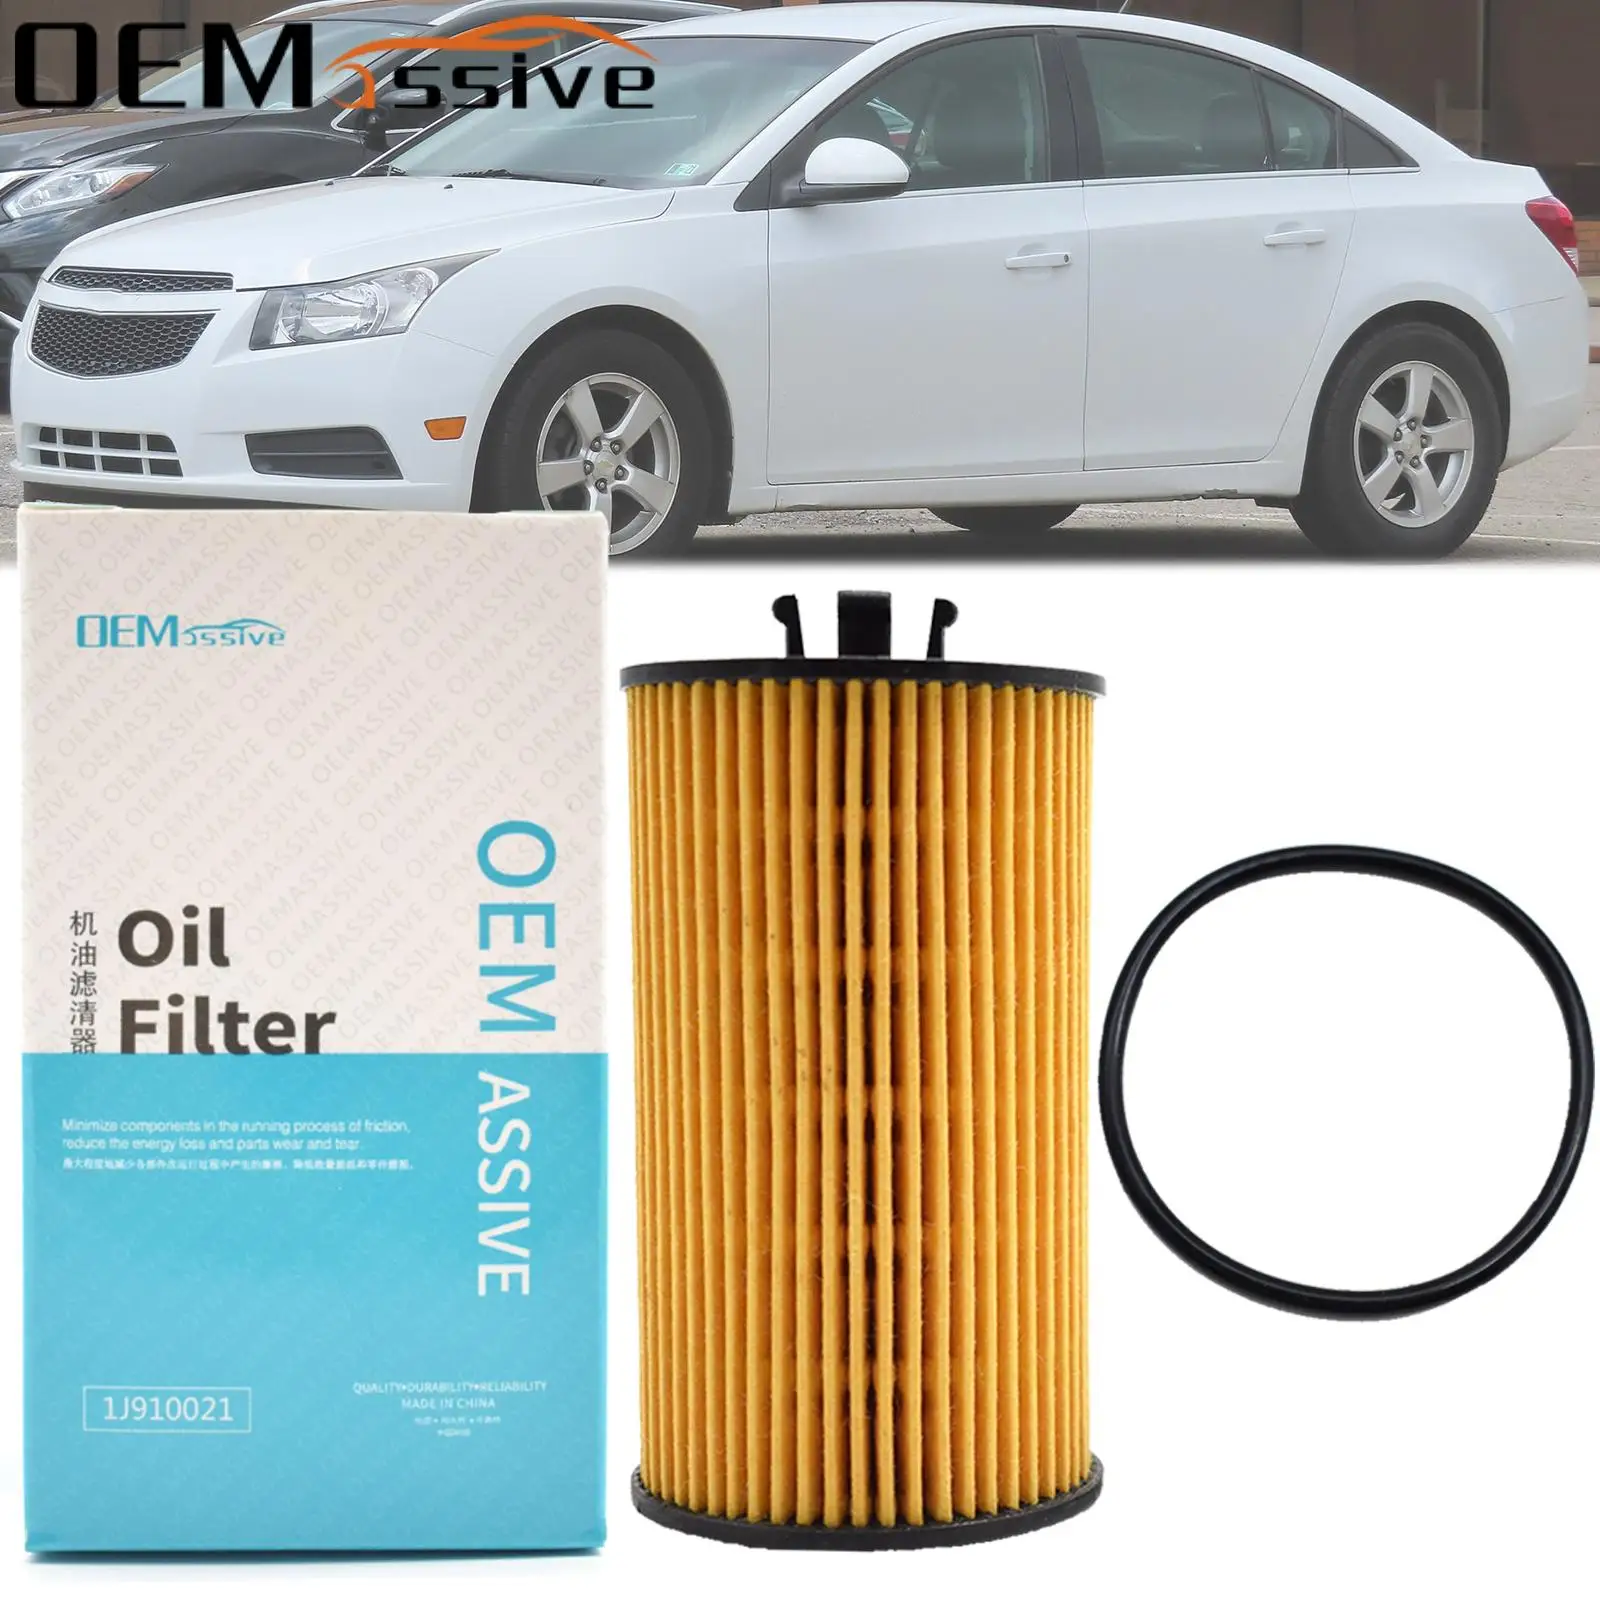 

Oil Filter For Chevrolet Holden Cruze J300 2009 - 2017 Daewoo Lacetti Premiere Holden F16D4 F18D4 LDE 2H0 1598CC 1796CC Engine